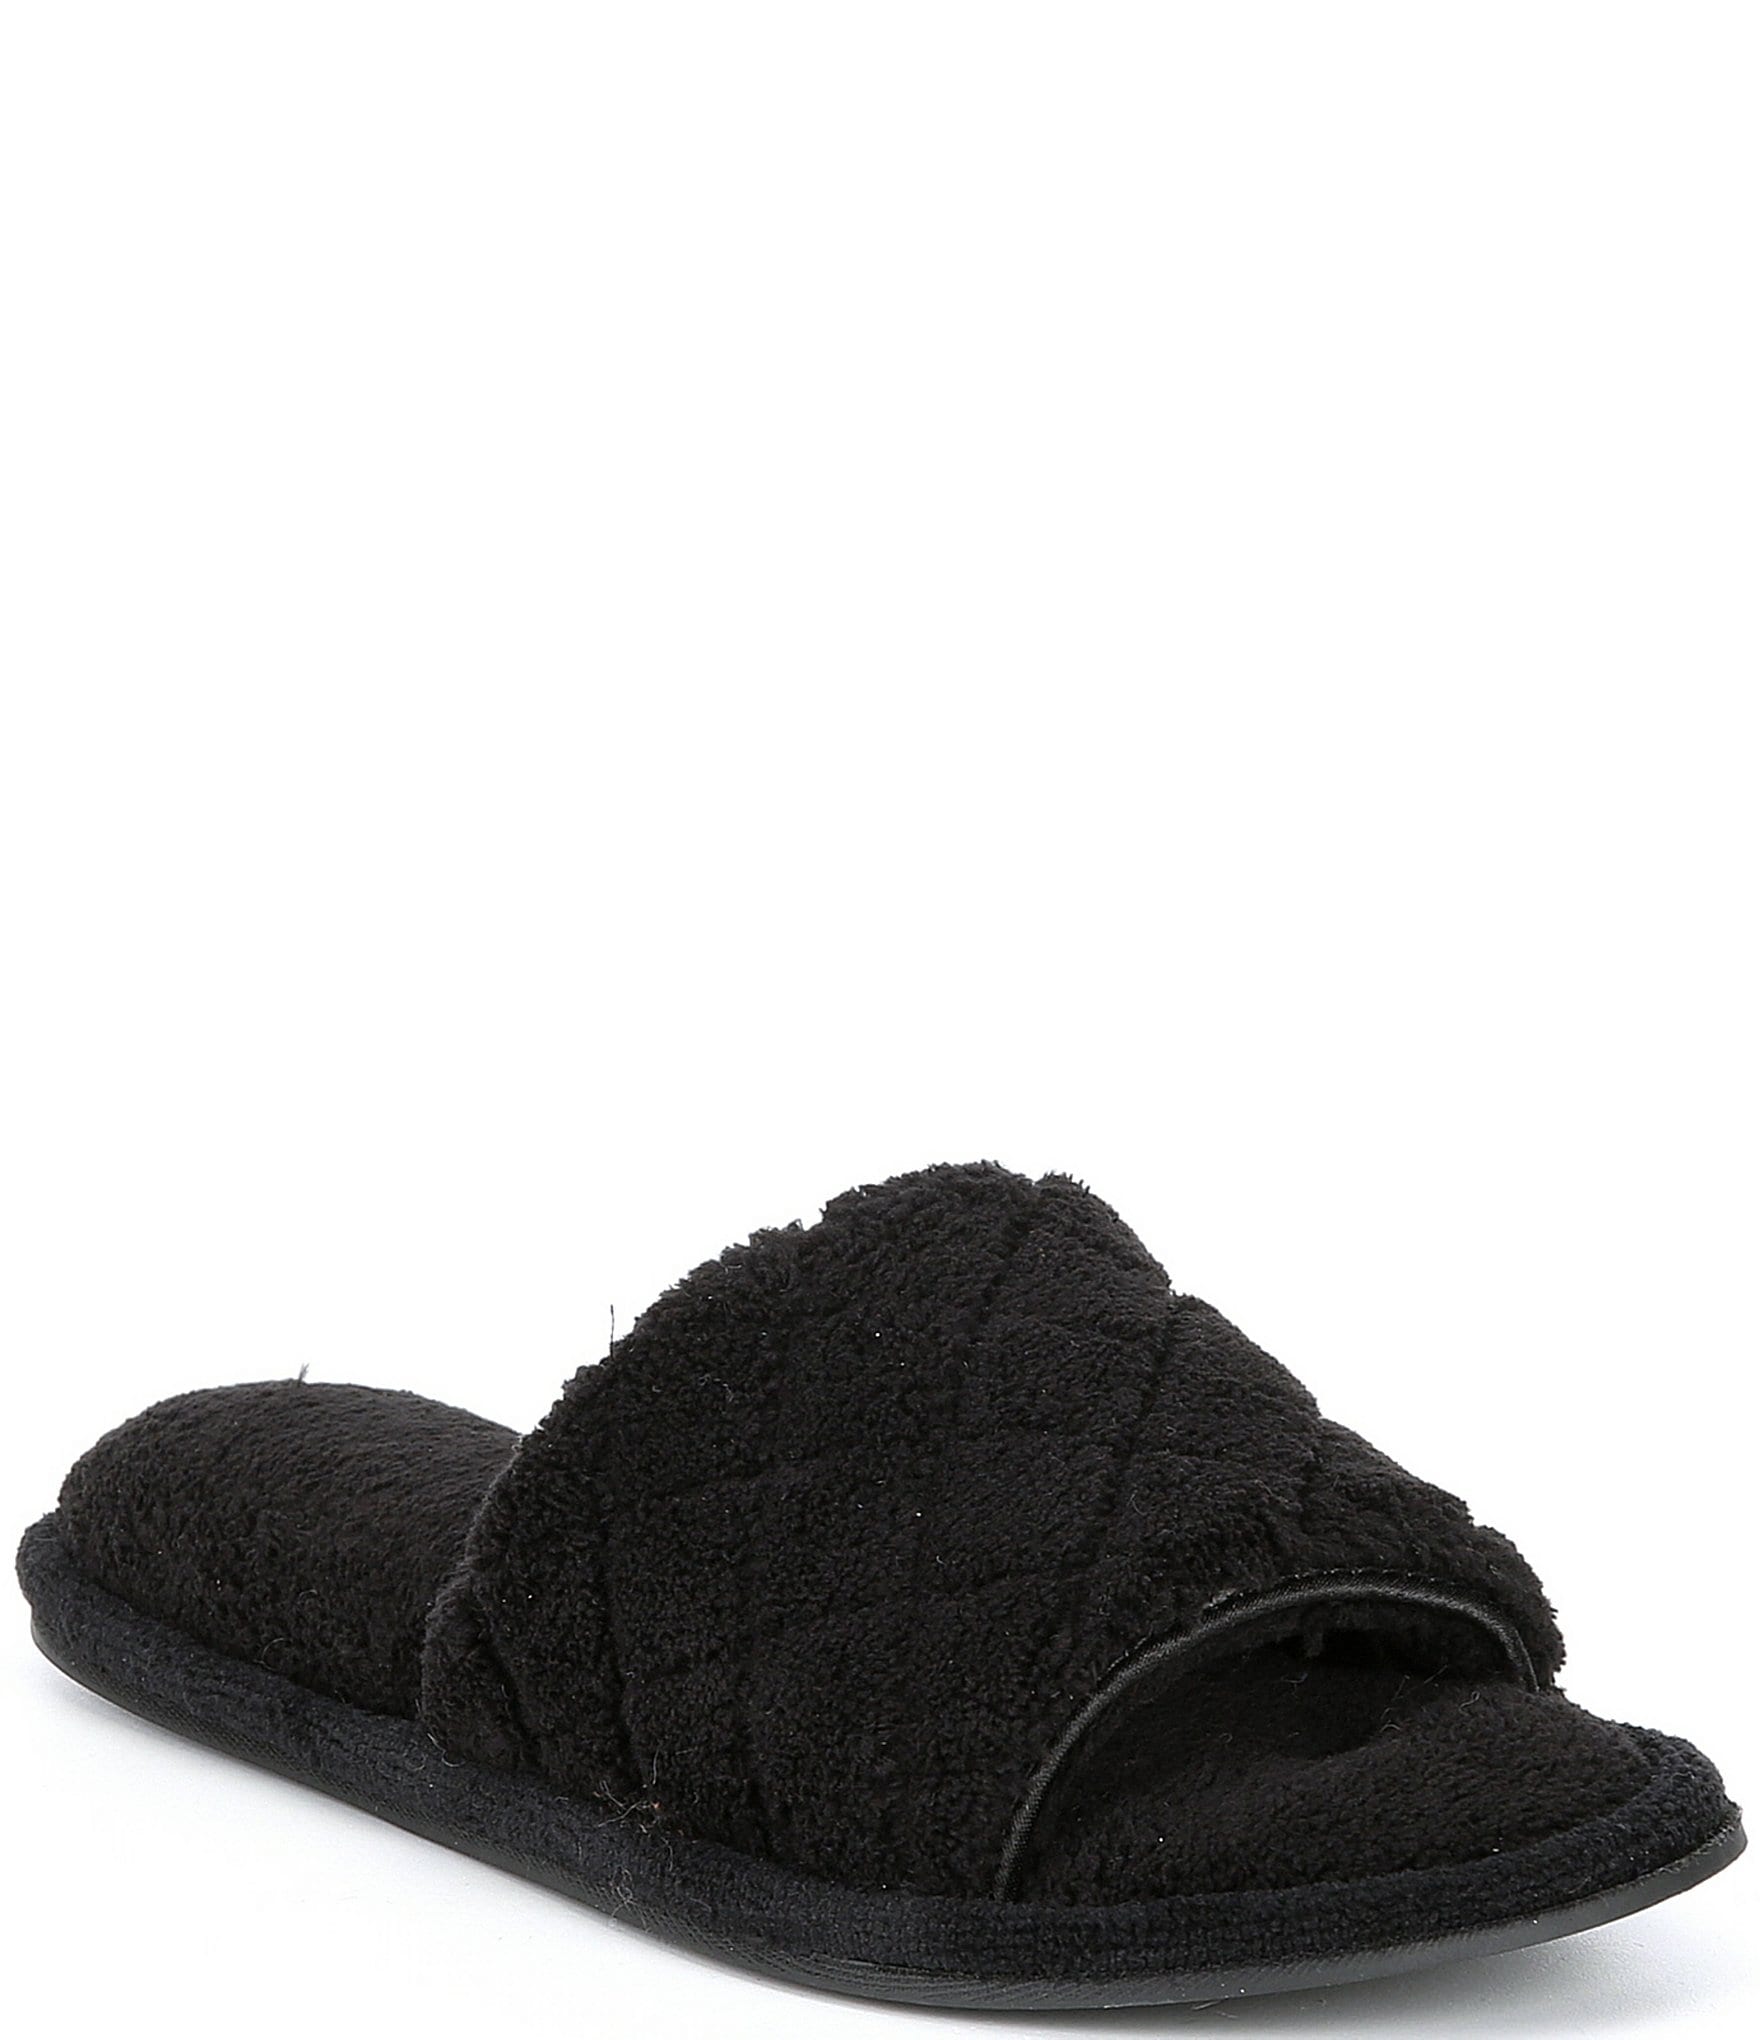 Buy > dillards womens house slippers > in stock